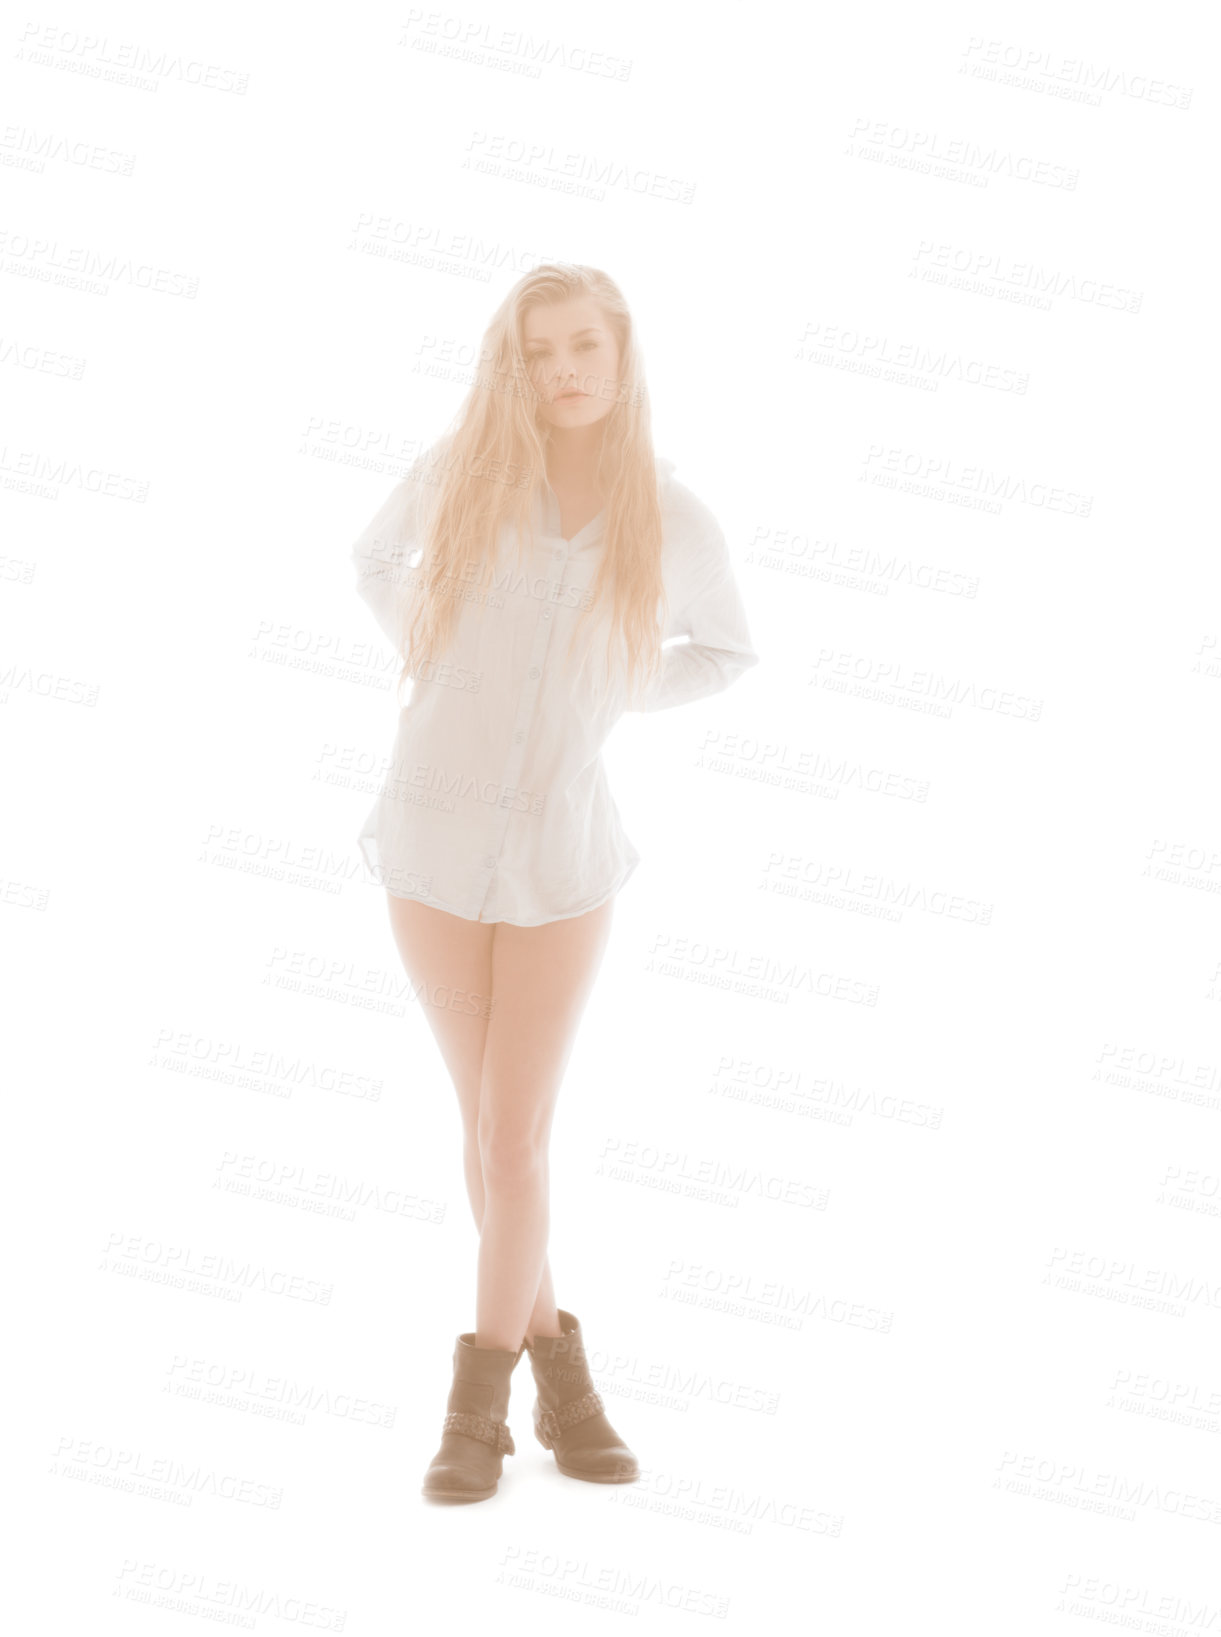 Buy stock photo An ethereal beauty bathed in white light wearing a long sleepshirt